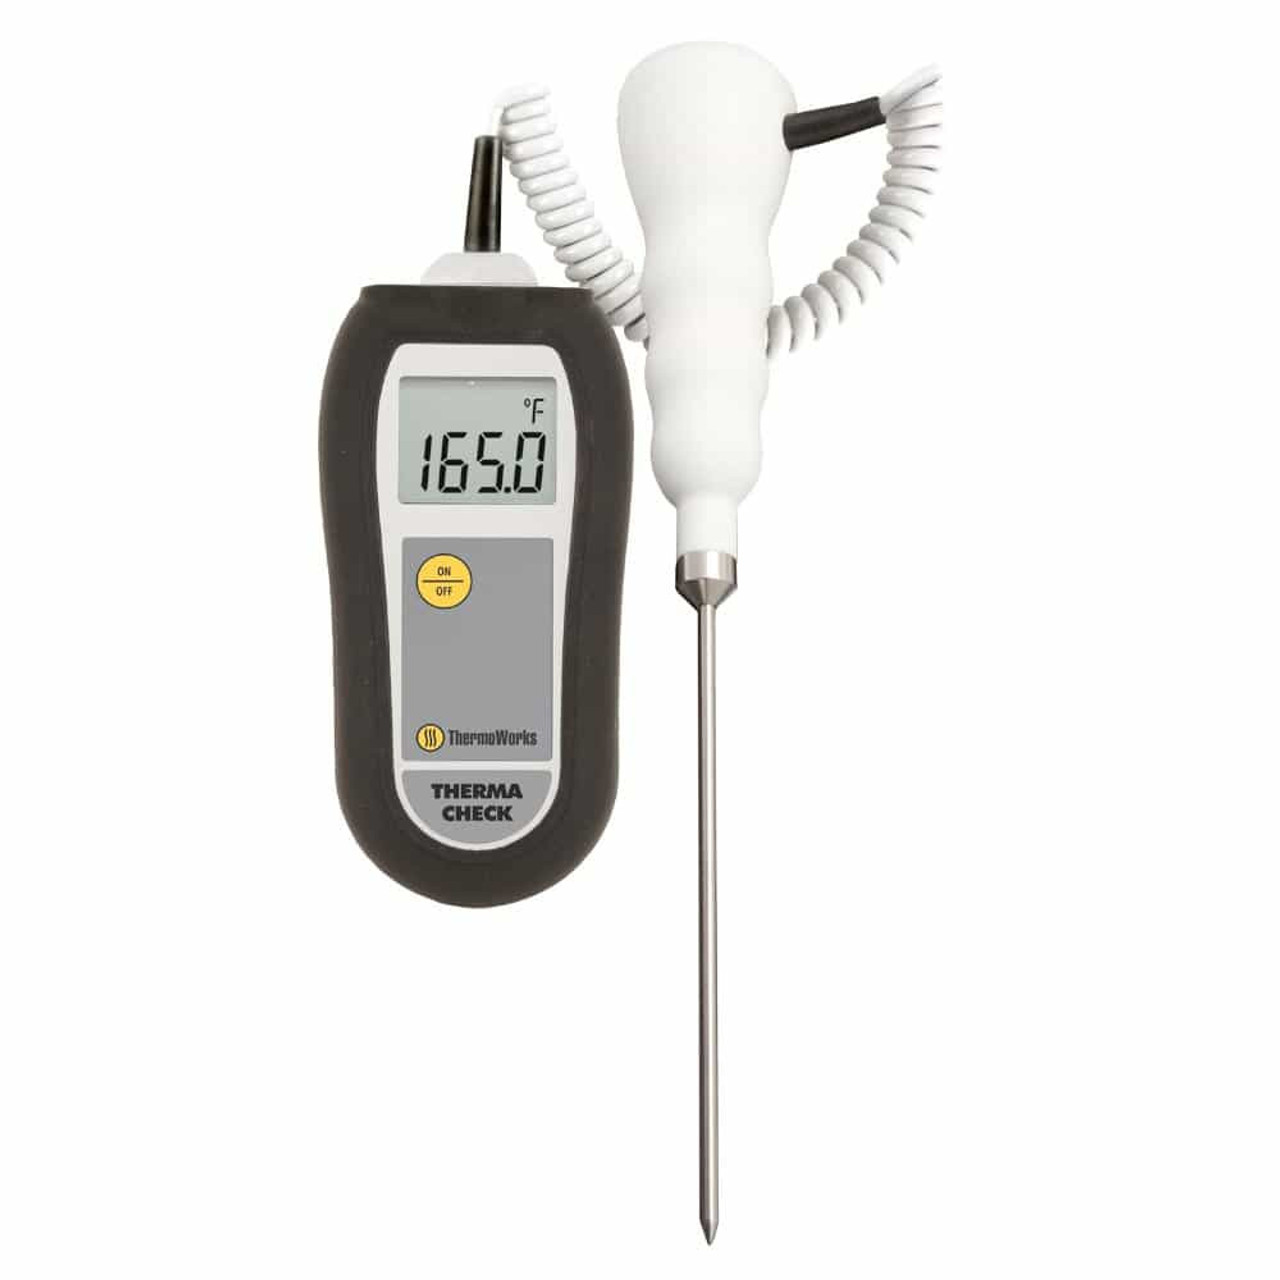 ThermoWorks TX-3100-GR Thermometer,-58 to 572 deg F,-50 t